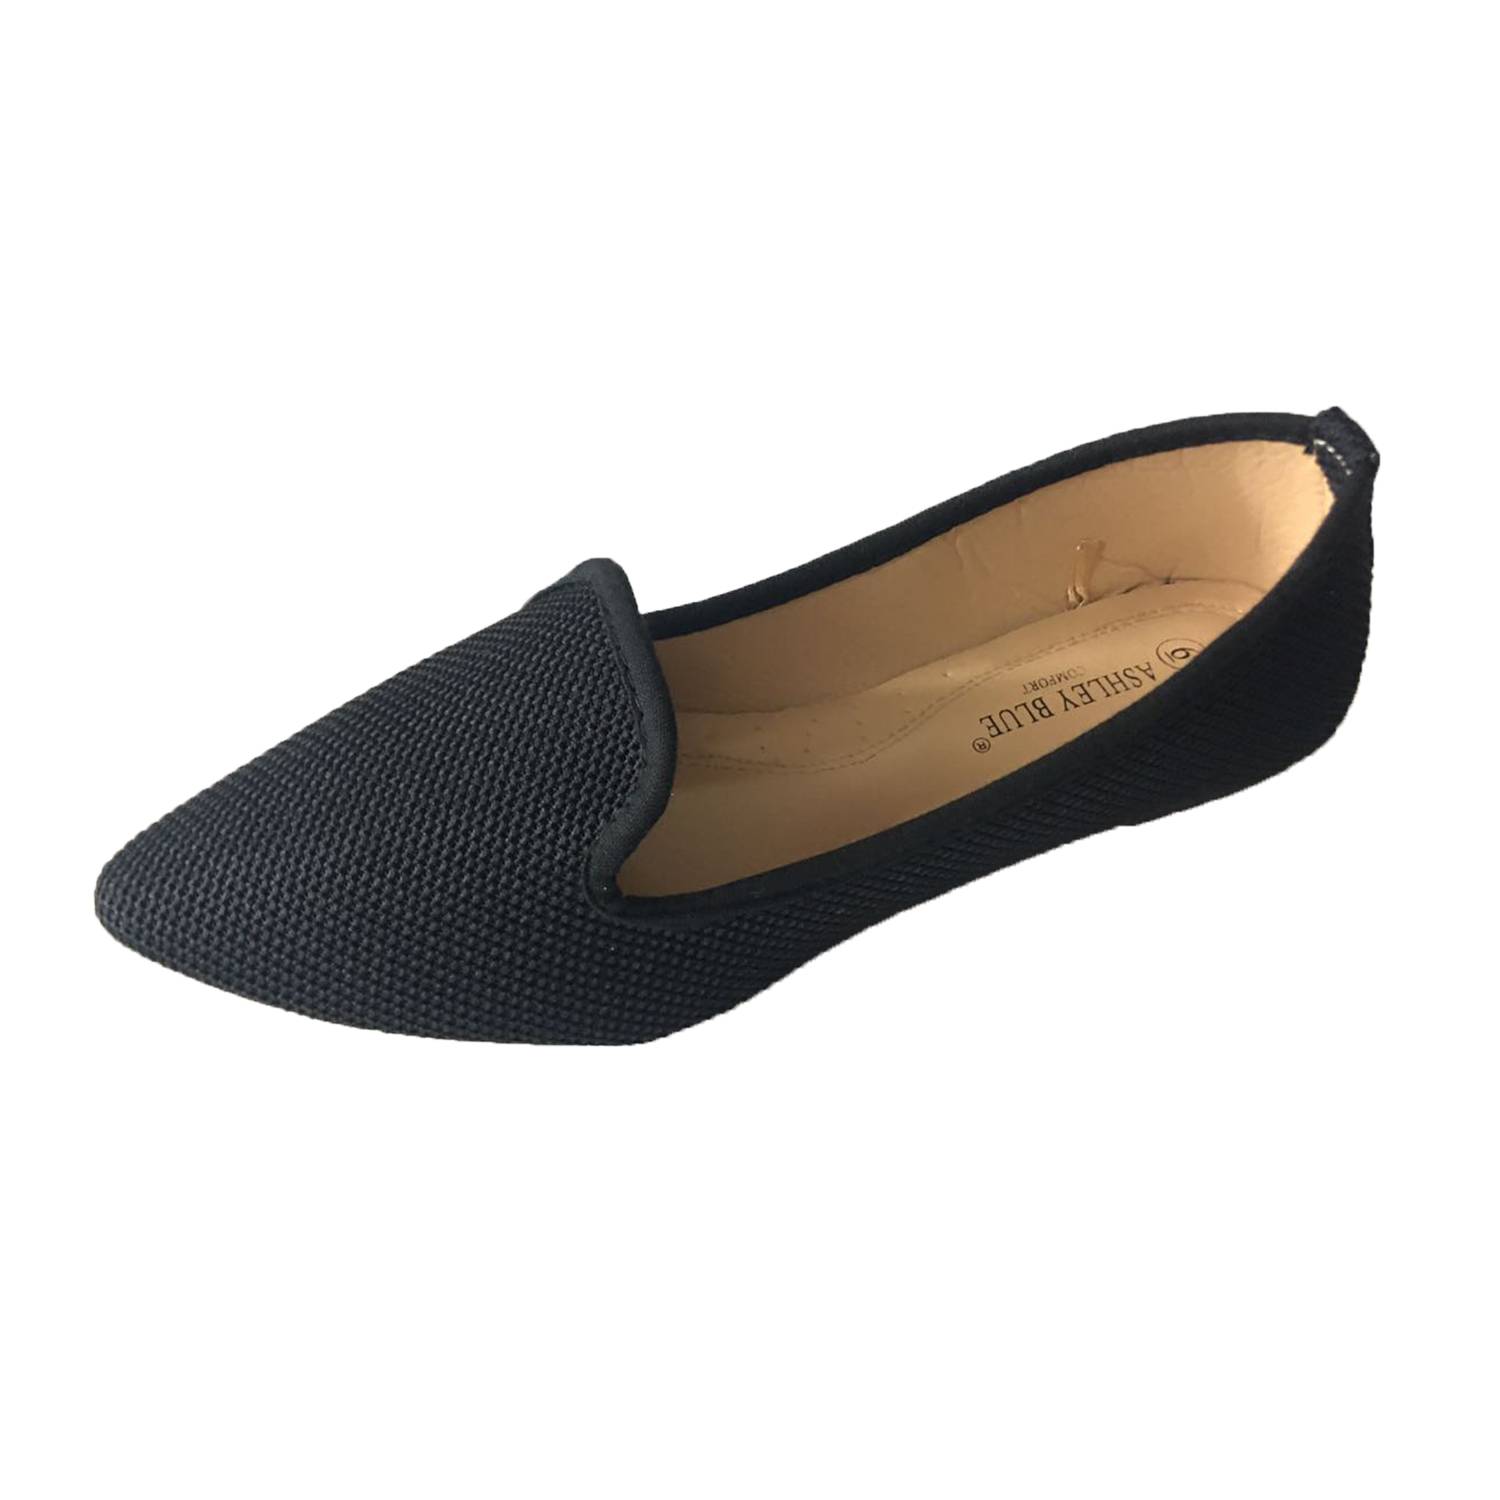 Women’s Shoes Slip On Comfort Light Pointed Toe Flats Featured Image